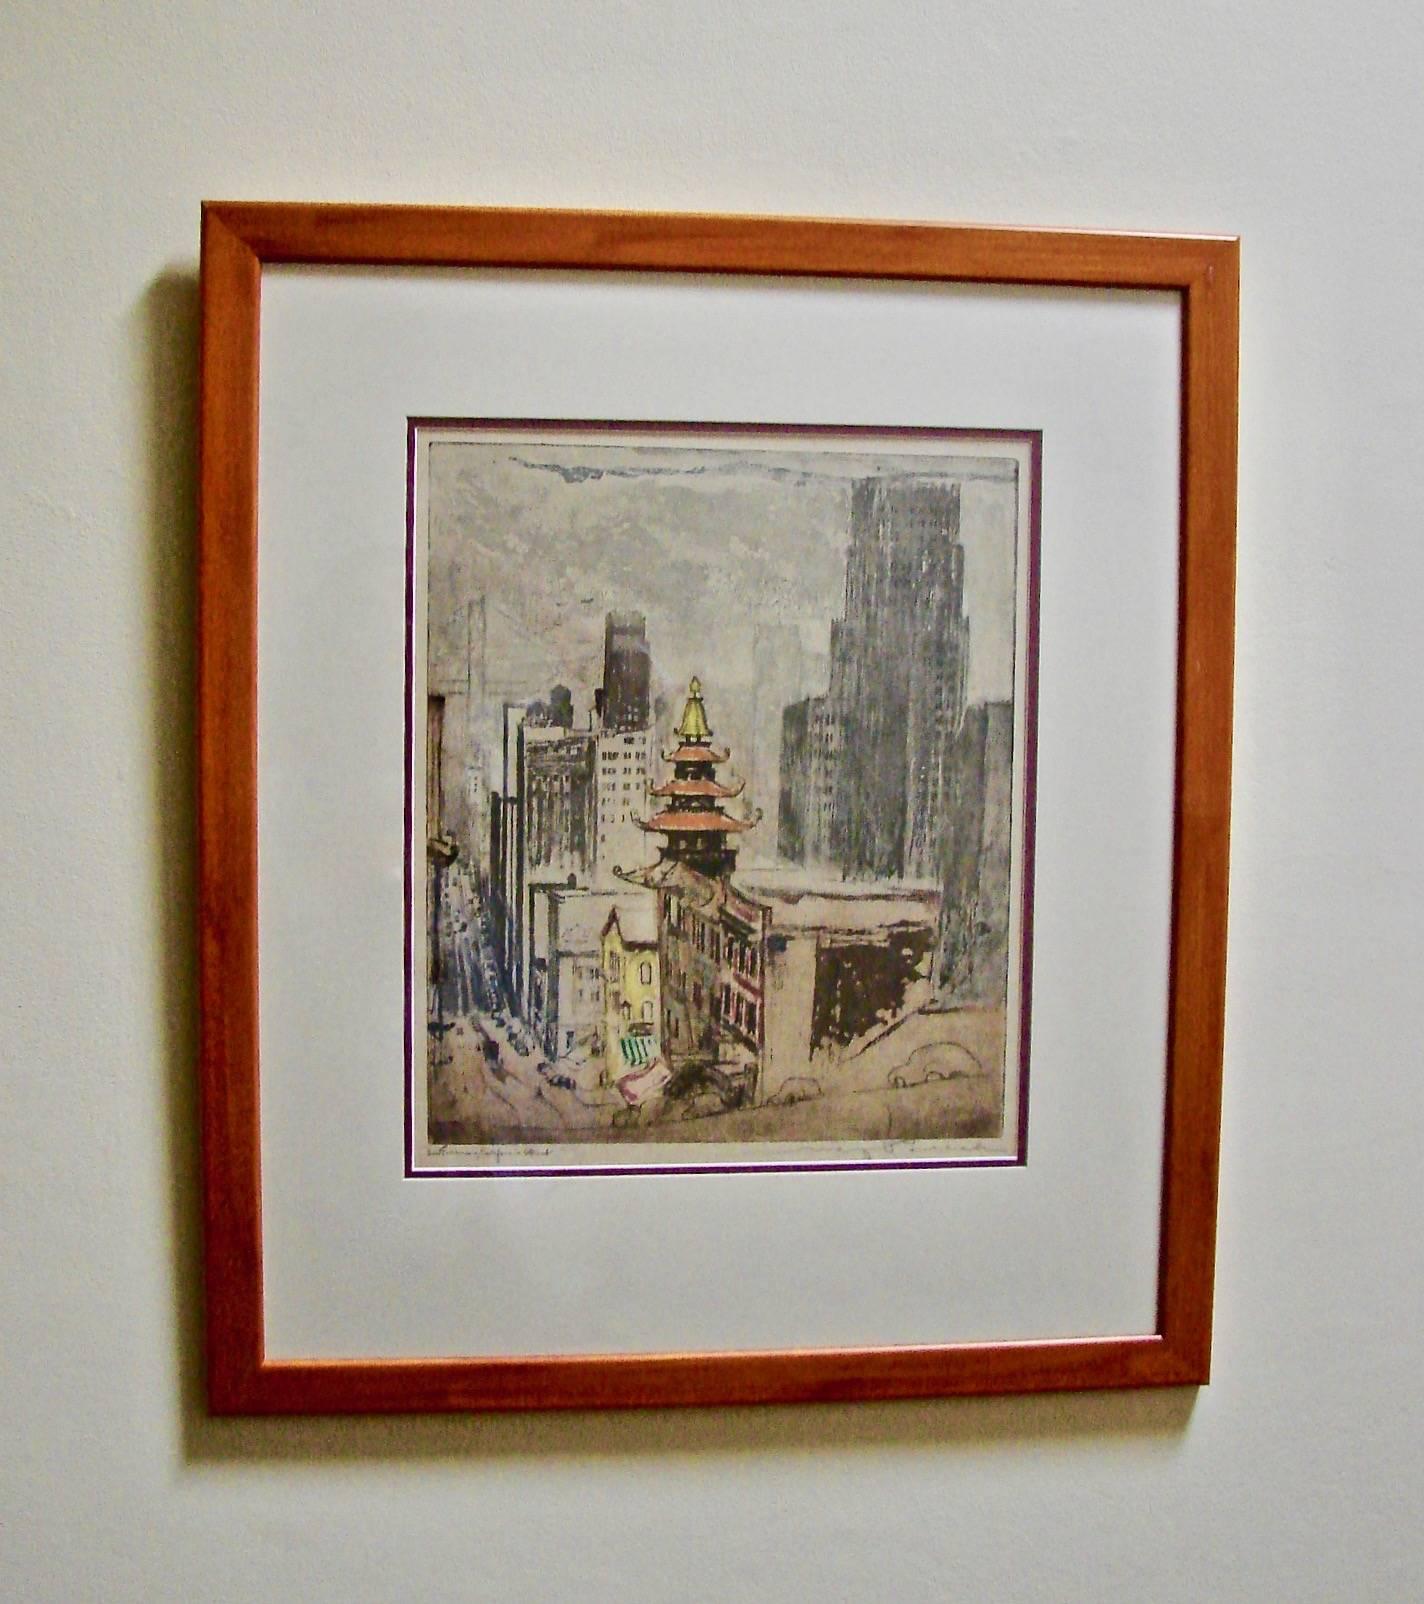 A fine colored soft ground etching and aquatint by Max Pollack depicting California Street in San Francisco, signed in pencil lower right and described and numbered 86 of 100 lower left. Max Pollack was an outstanding Austrian-American painter and